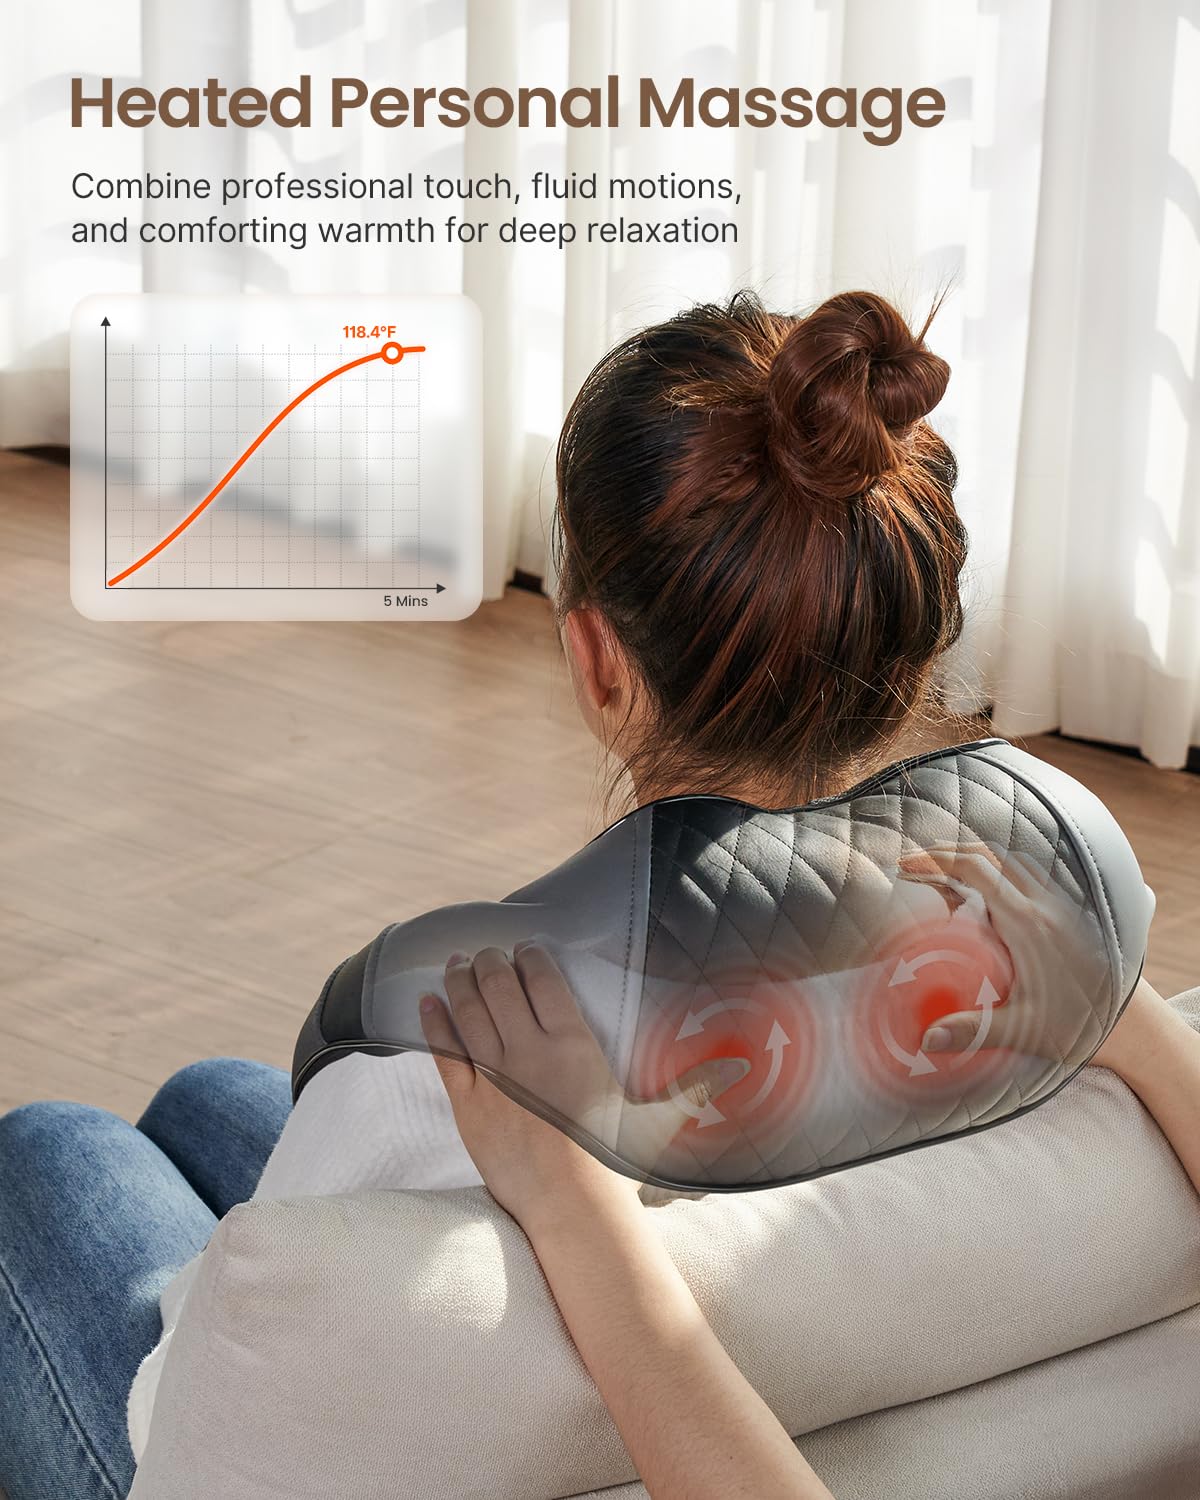 A woman sitting on the floor leans against a couch, using a Renpho U-Neck 2 Neck & Shoulders Massager wrapped around her shoulders. An overlaid graph in the corner shows a temperature increase, illustrating the heat feature of the massage.